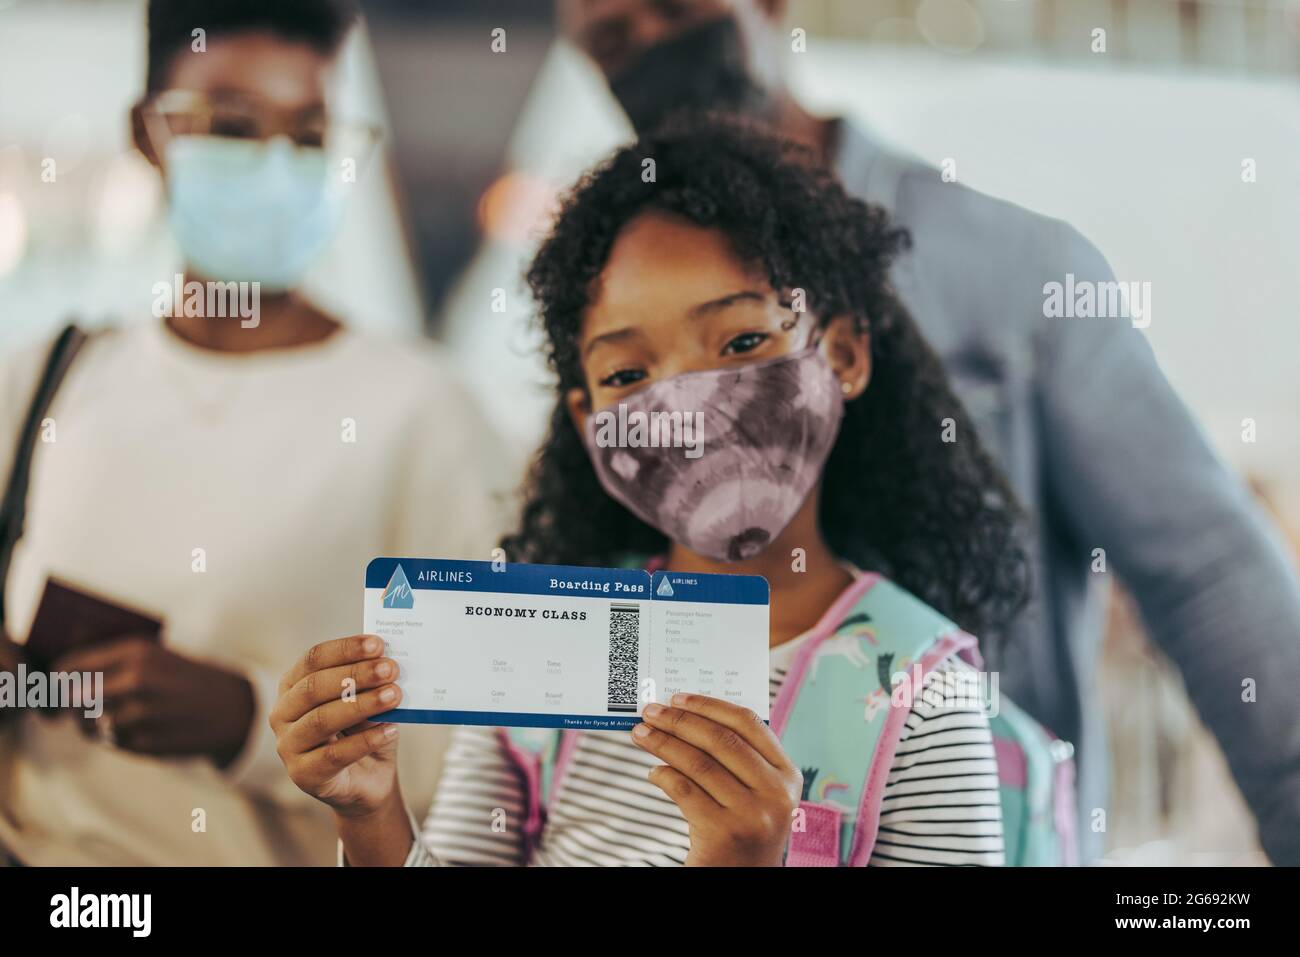 Girl showing boarding pass while at boarding gate with family. Young girl and her family at airport doing on a holiday during pandemic. Stock Photo